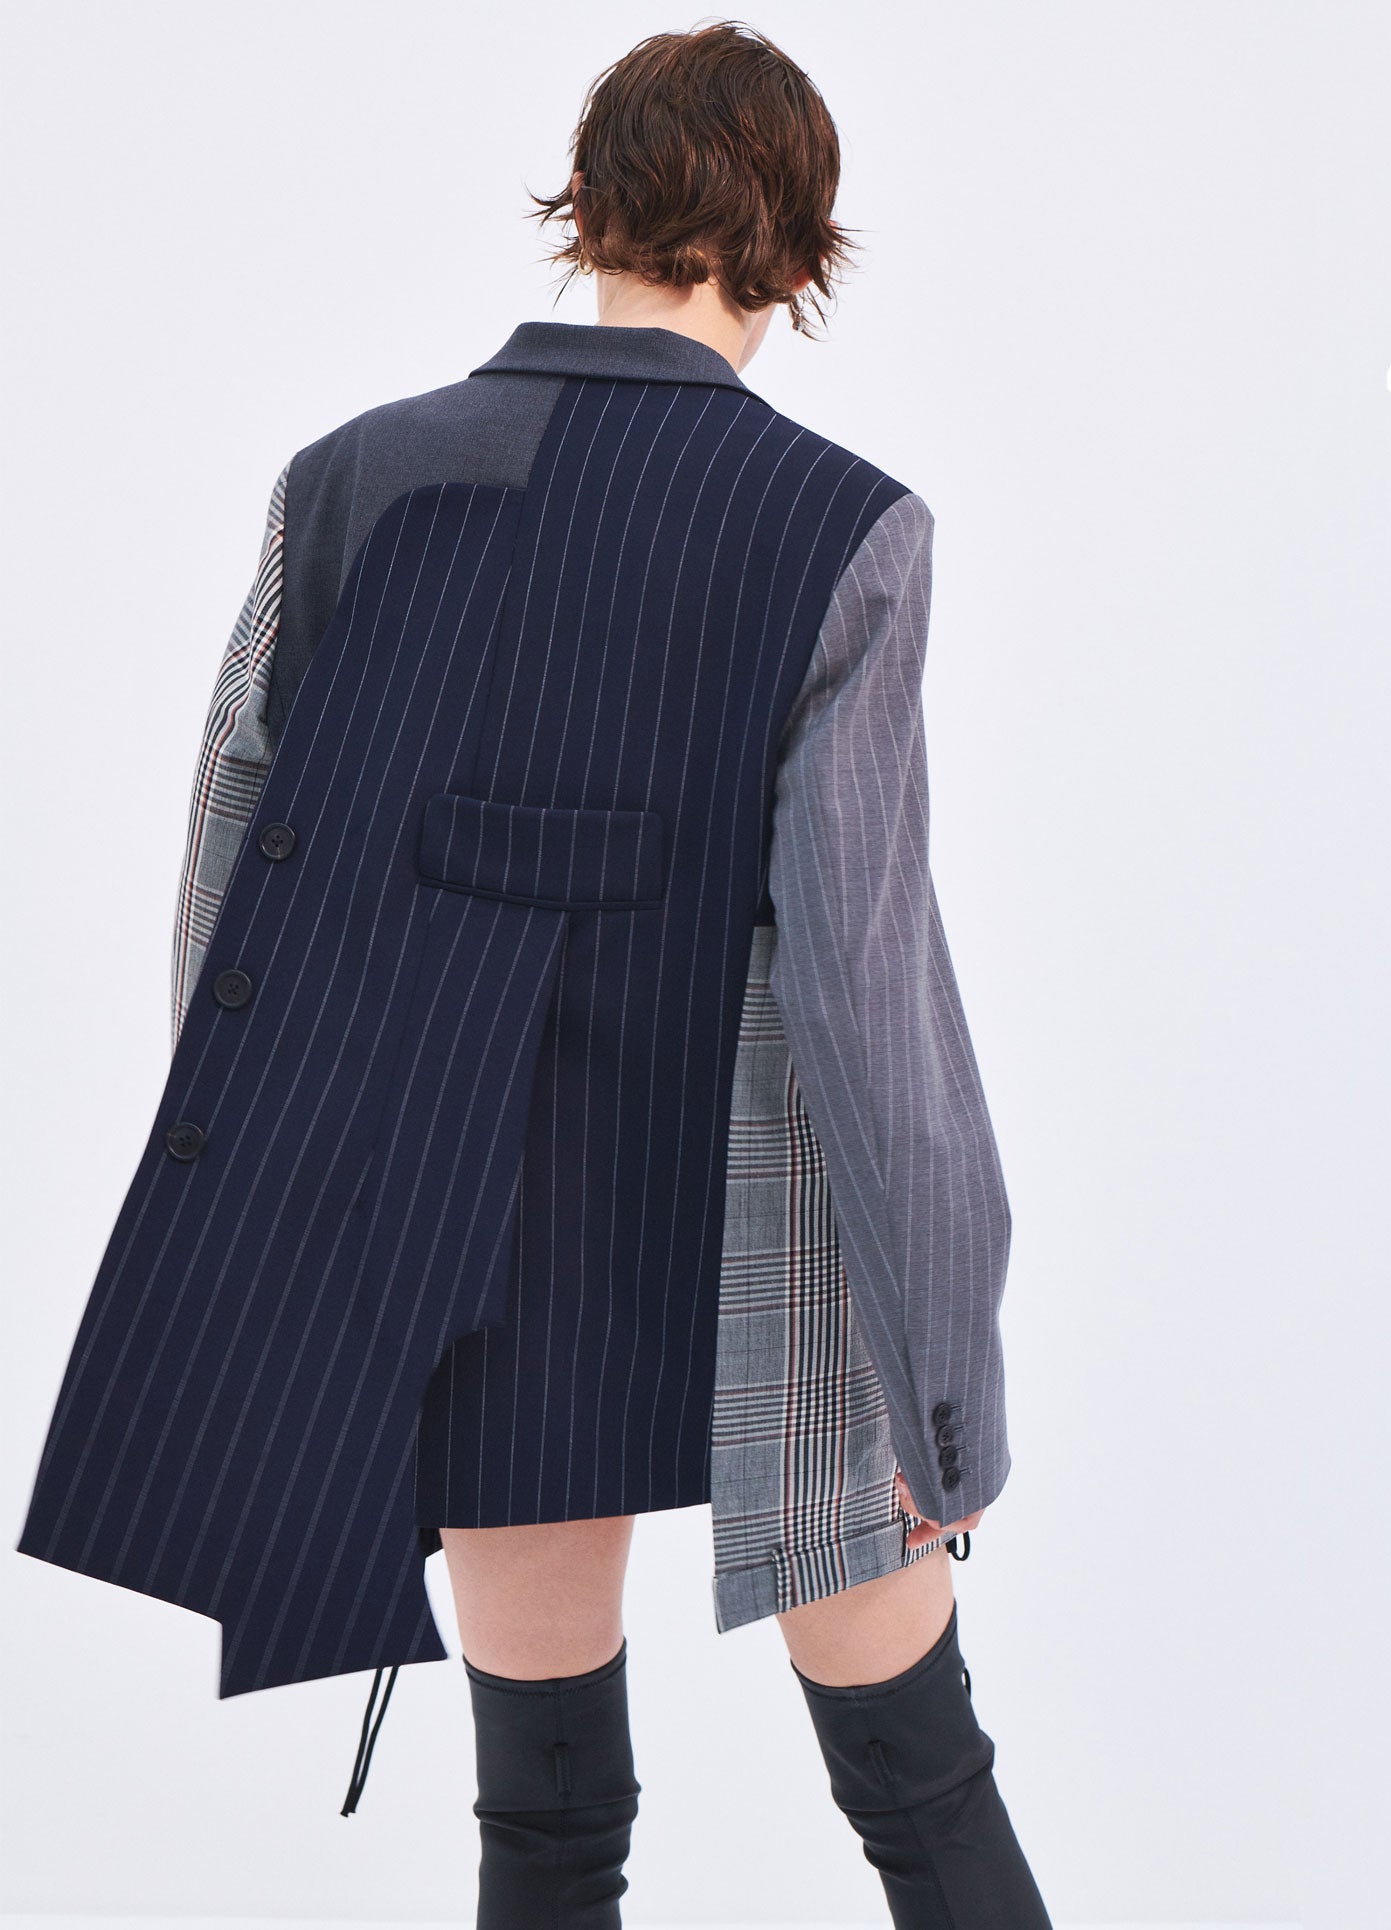 MONSE Spring 2024 Combo Boxy Tailored Jacket in Charcoal on model back view